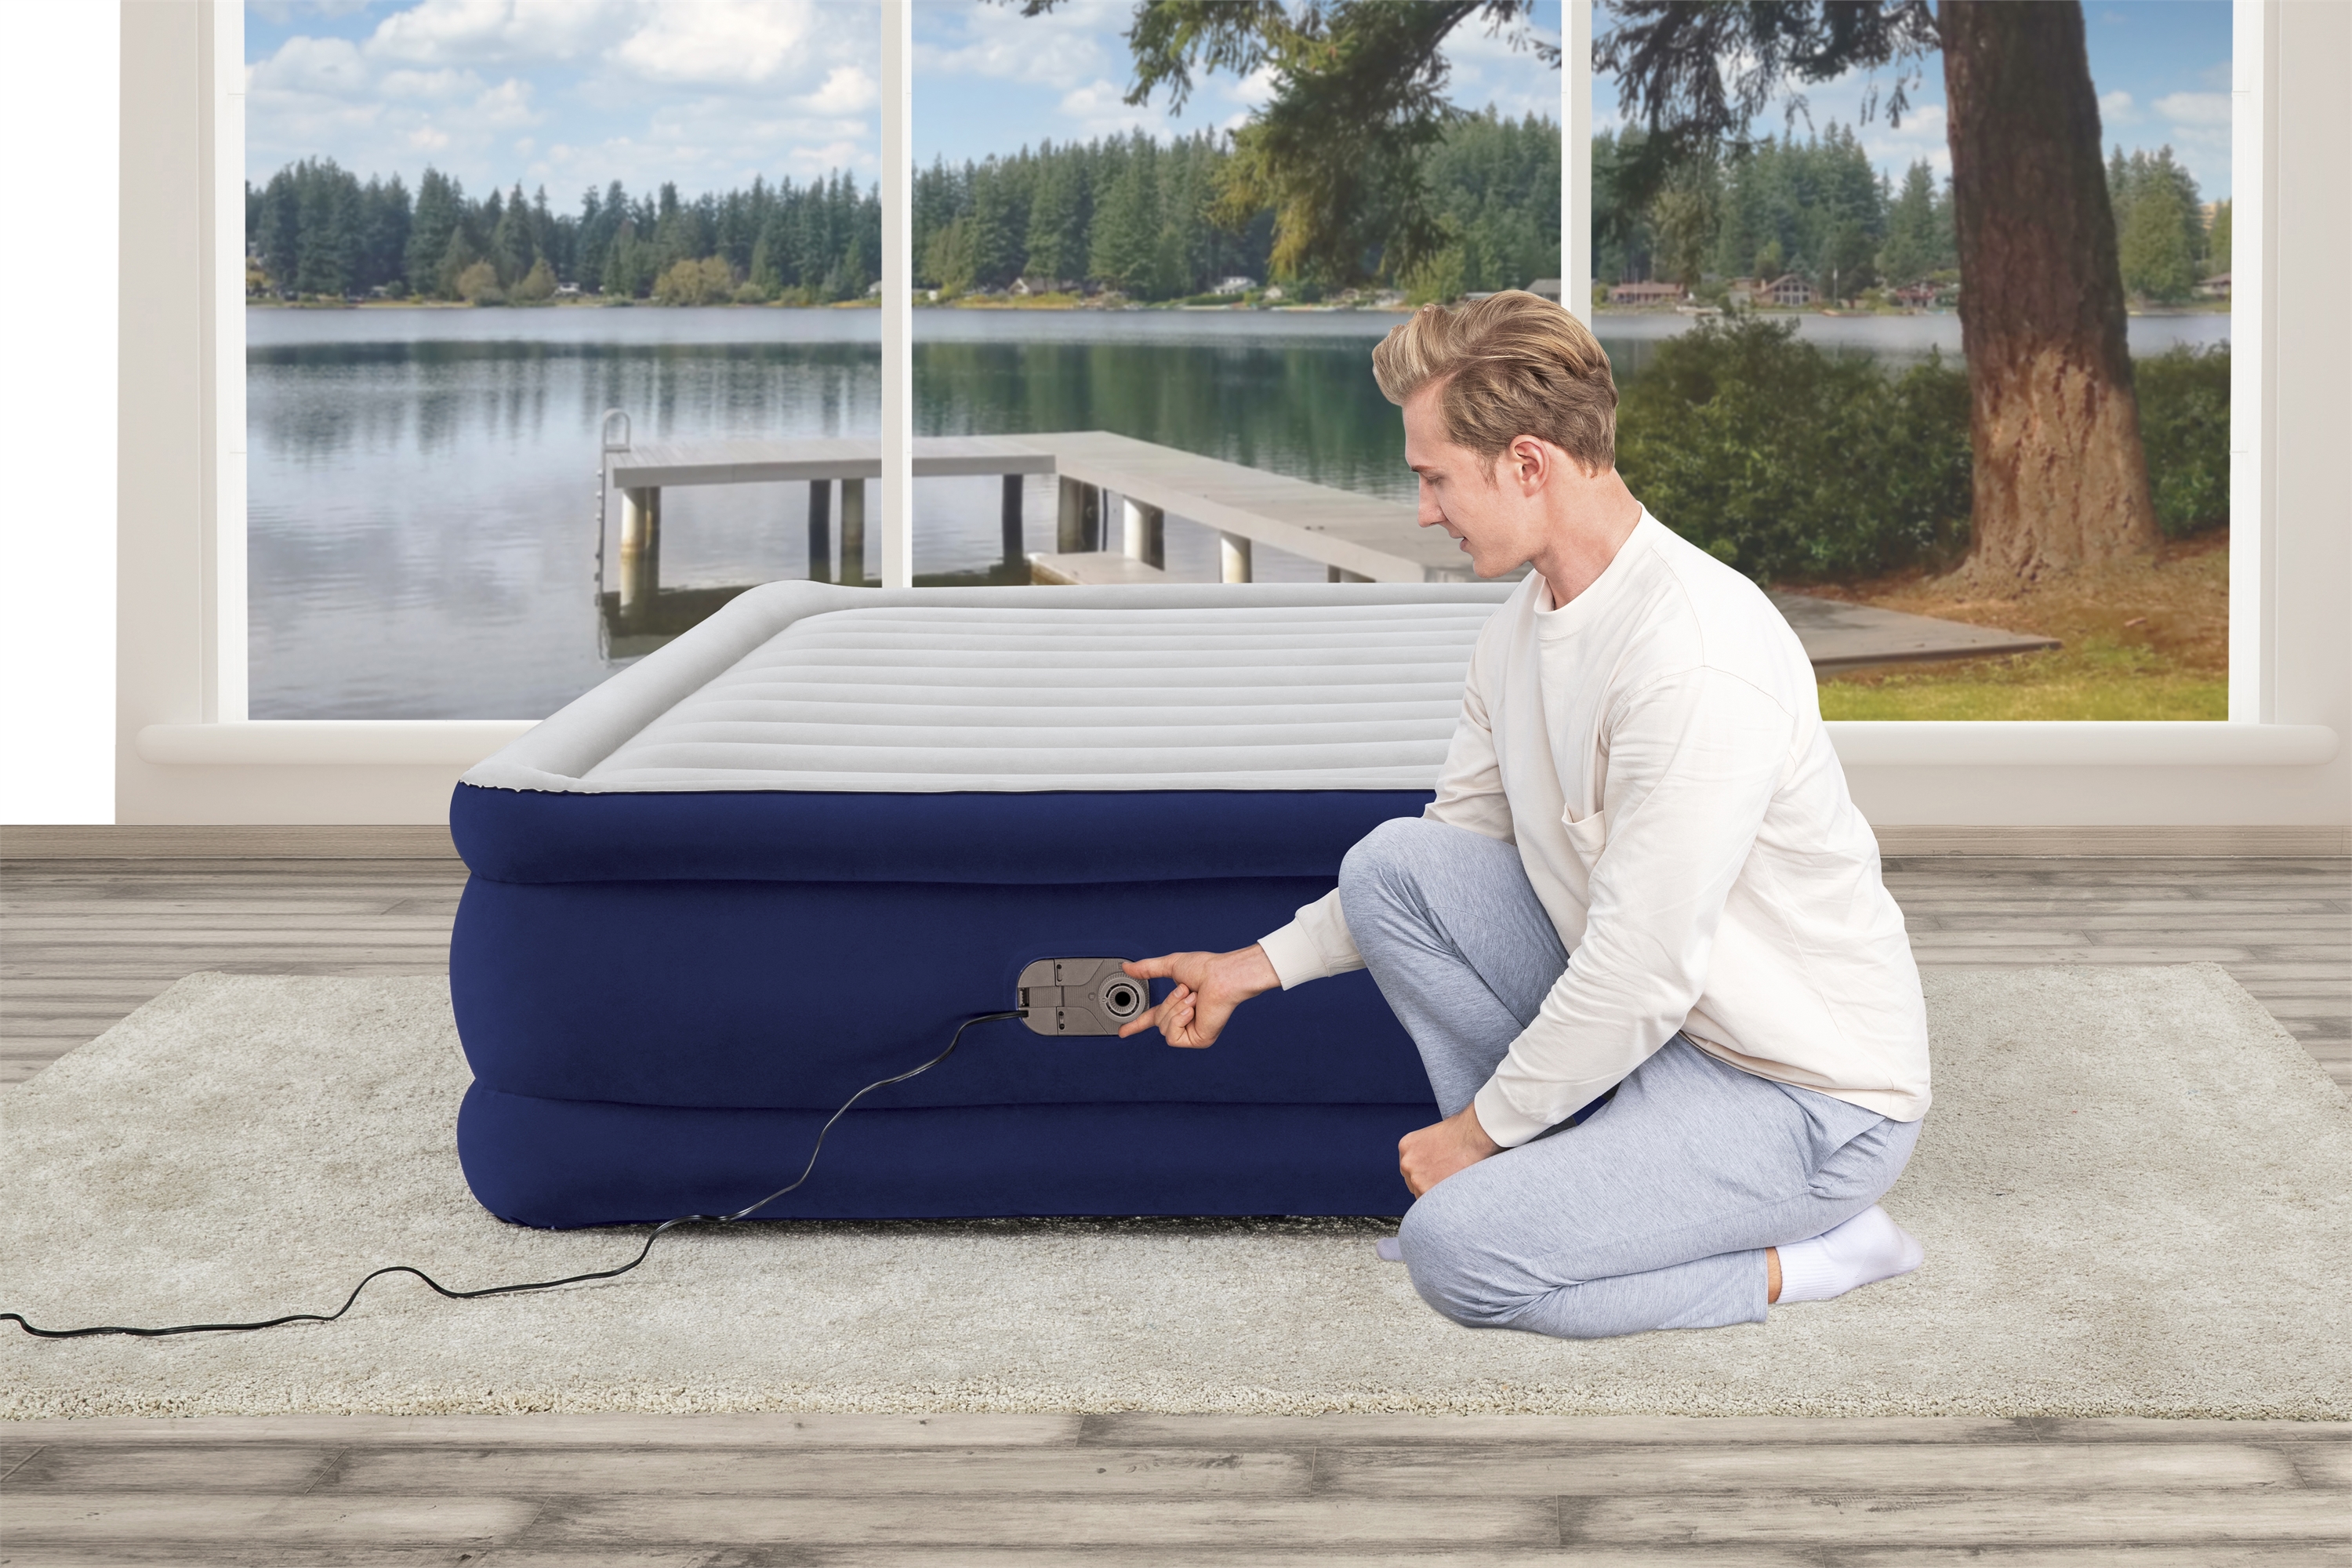 Bestway Tritech Air Mattress Queen 22 in. with Built-in AC Pump and Antimicrobial Coating - image 4 of 12